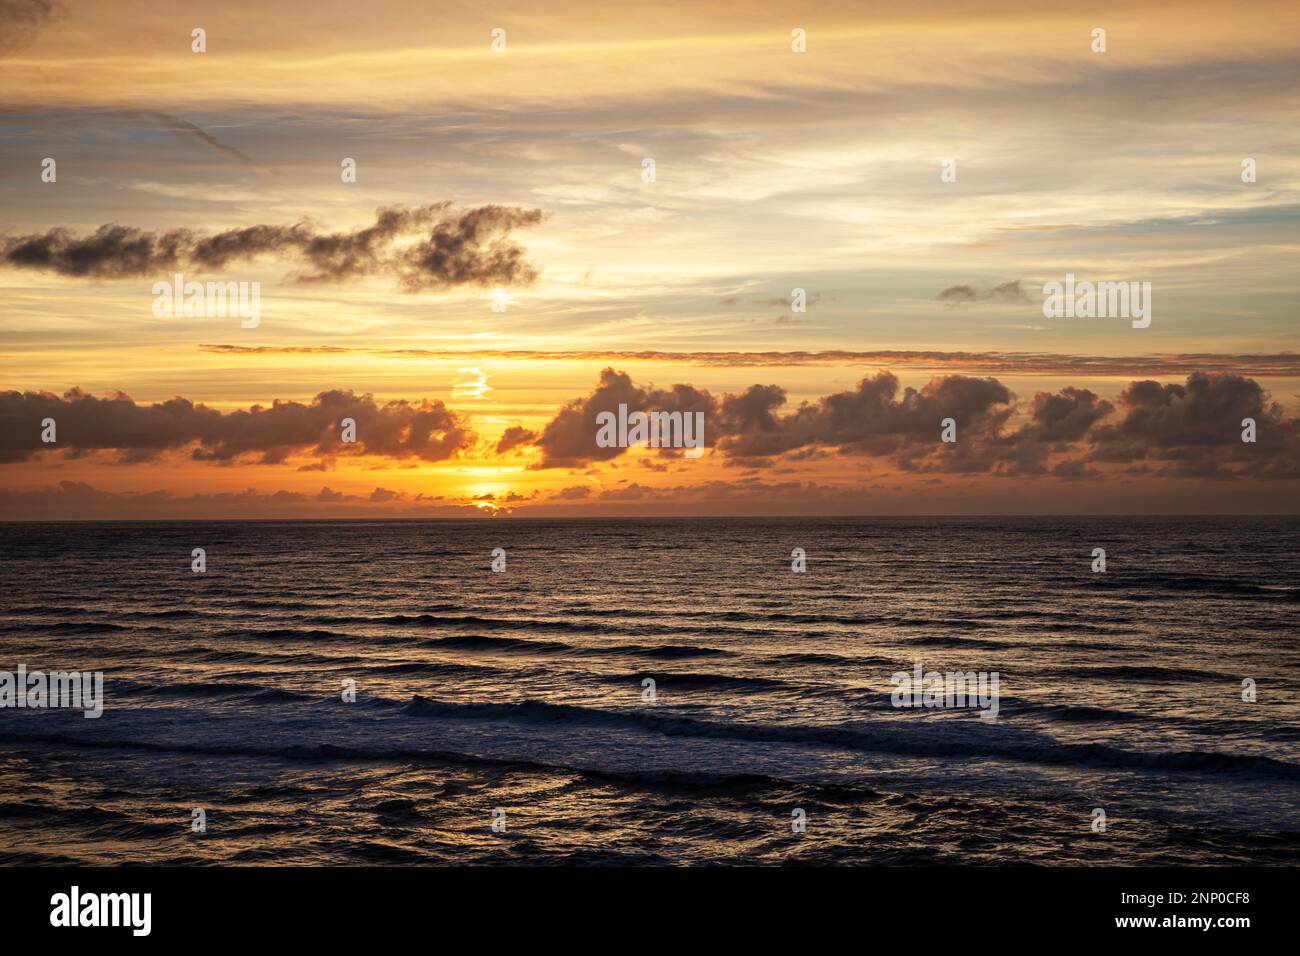 WA23118-00...WASHINGTON - Sunset over the Pacific Ocean from North Head in Cape Disappointment State Park. Stock Photo